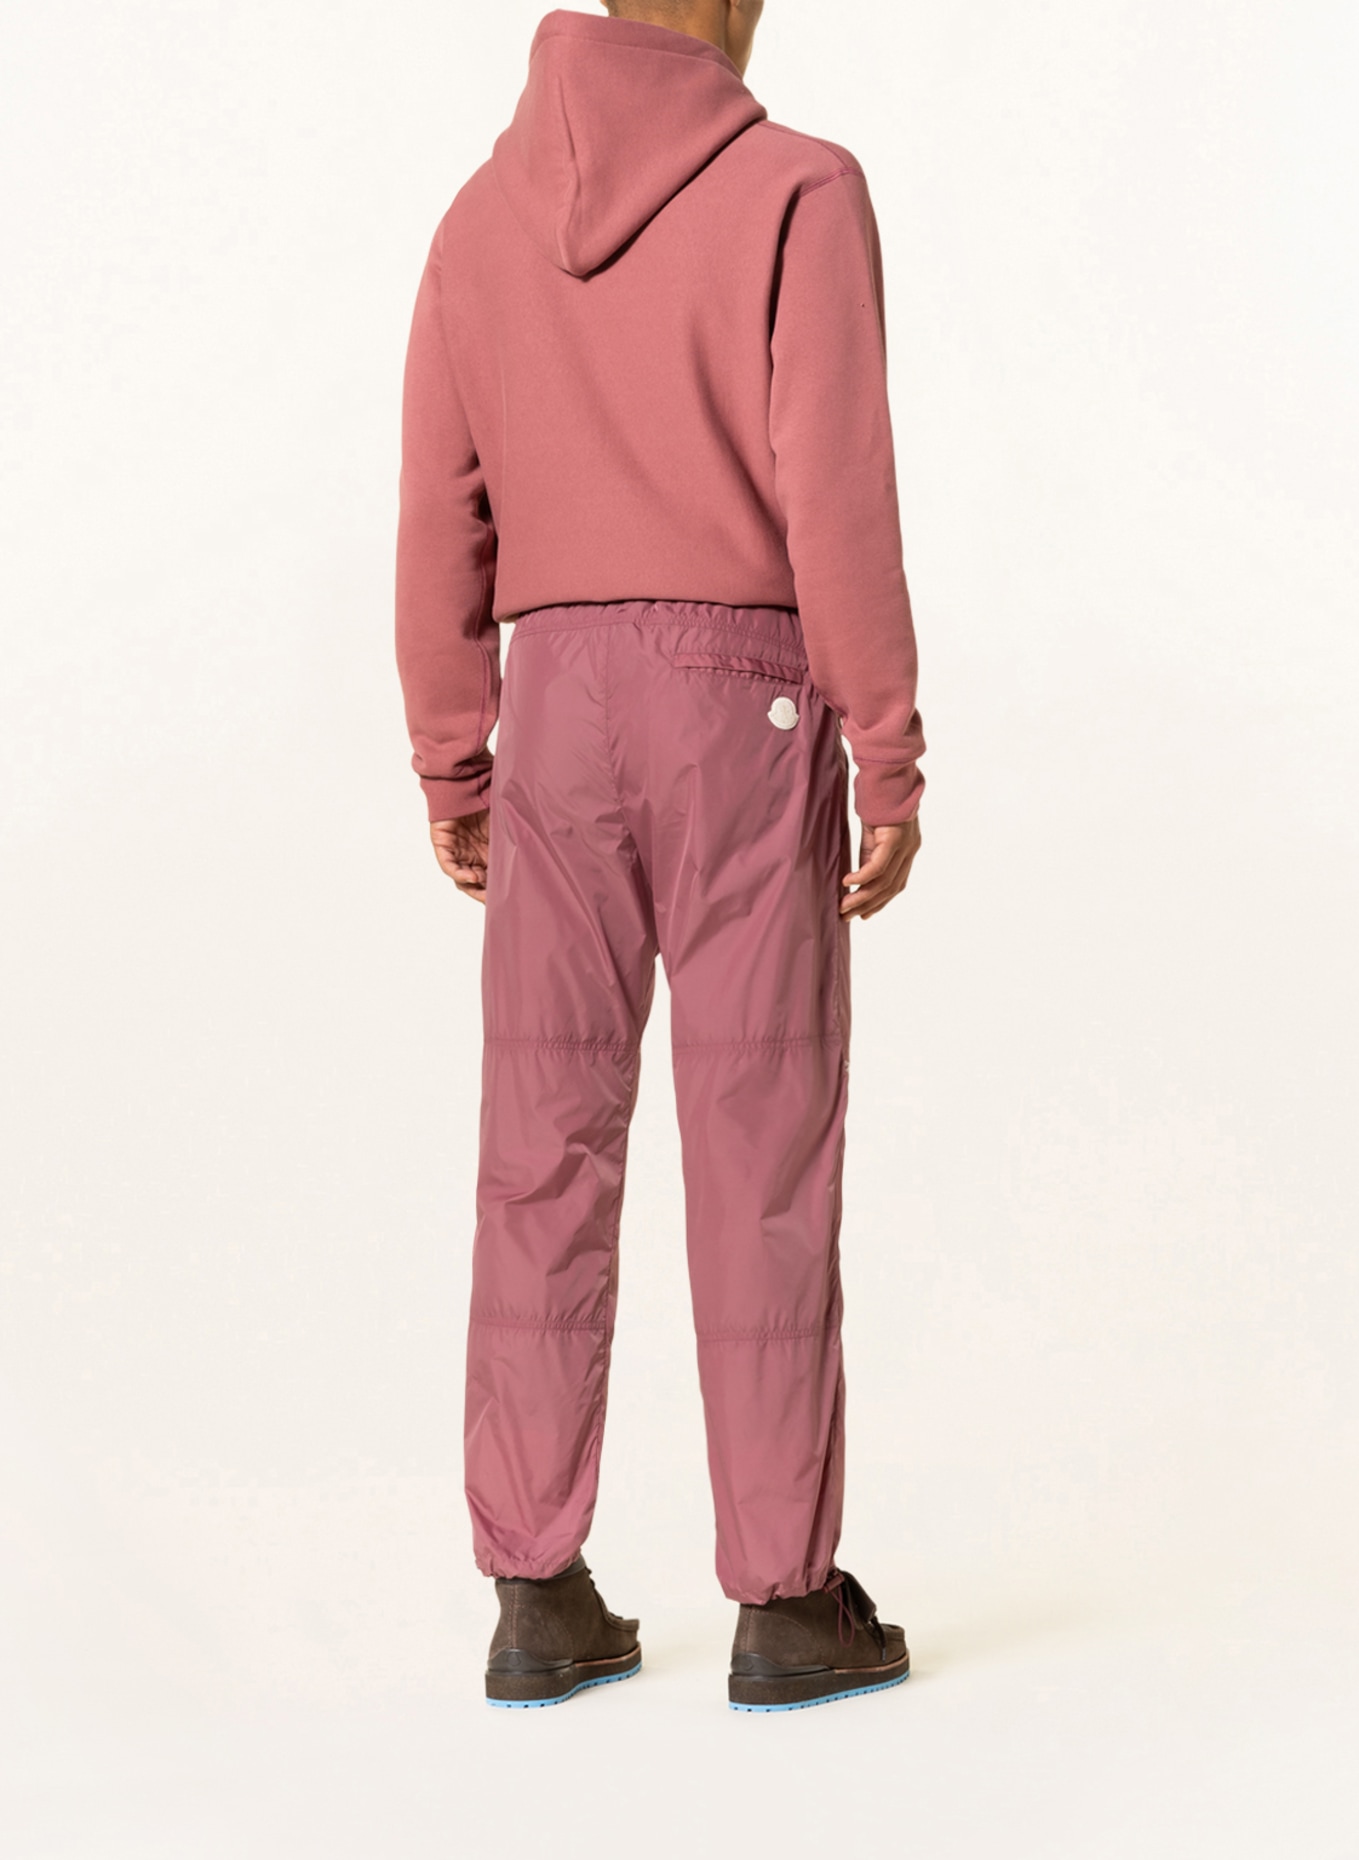 MONCLER GENIUS Trousers in jogger style , Color: DUSKY PINK (Image 3)